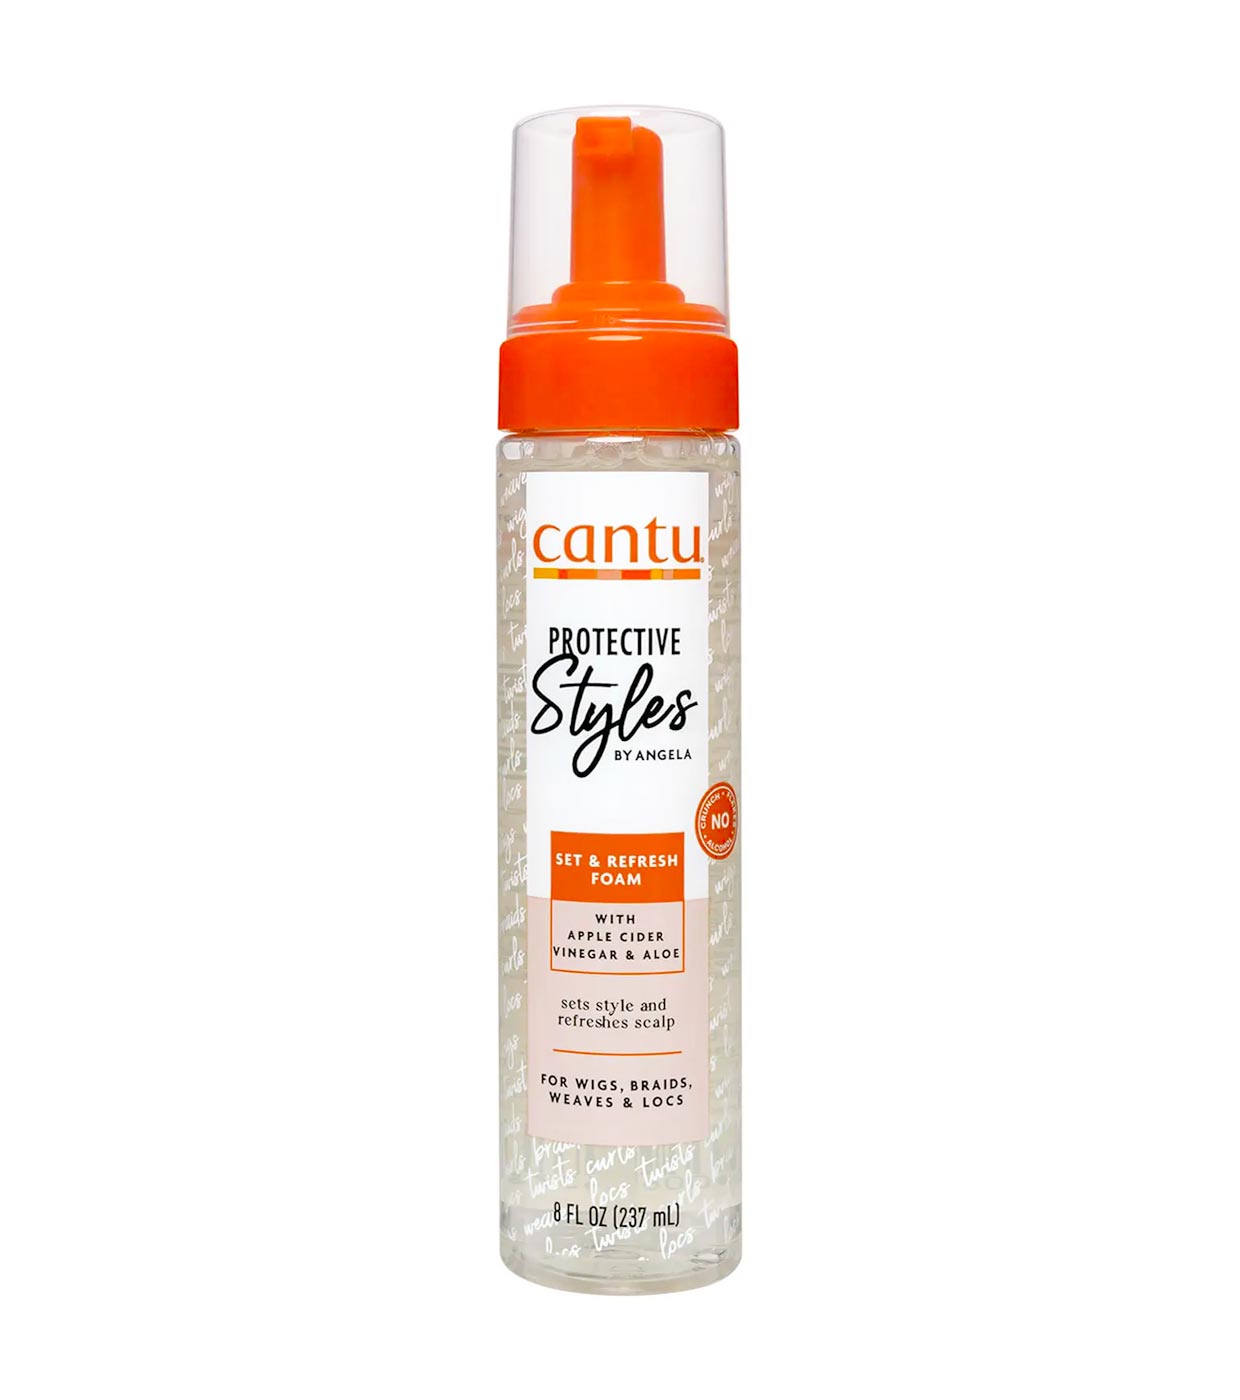 Buy Cantu - and Set foam - Natural Fixing Maquillalia extensions - hair & Fresh | Styles* *Protective